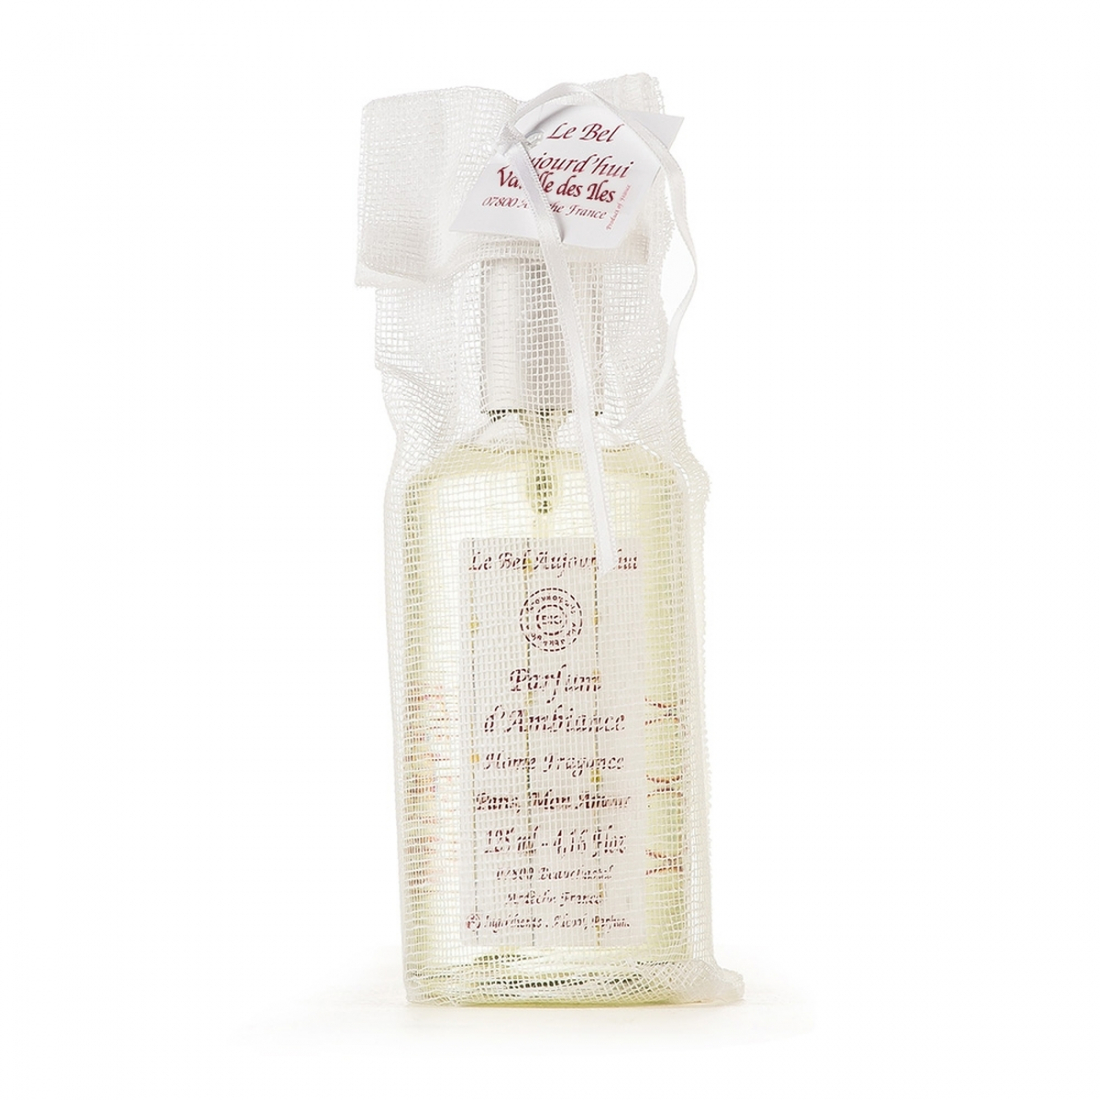 'Lily Rose' Home Perfume - 125 ml